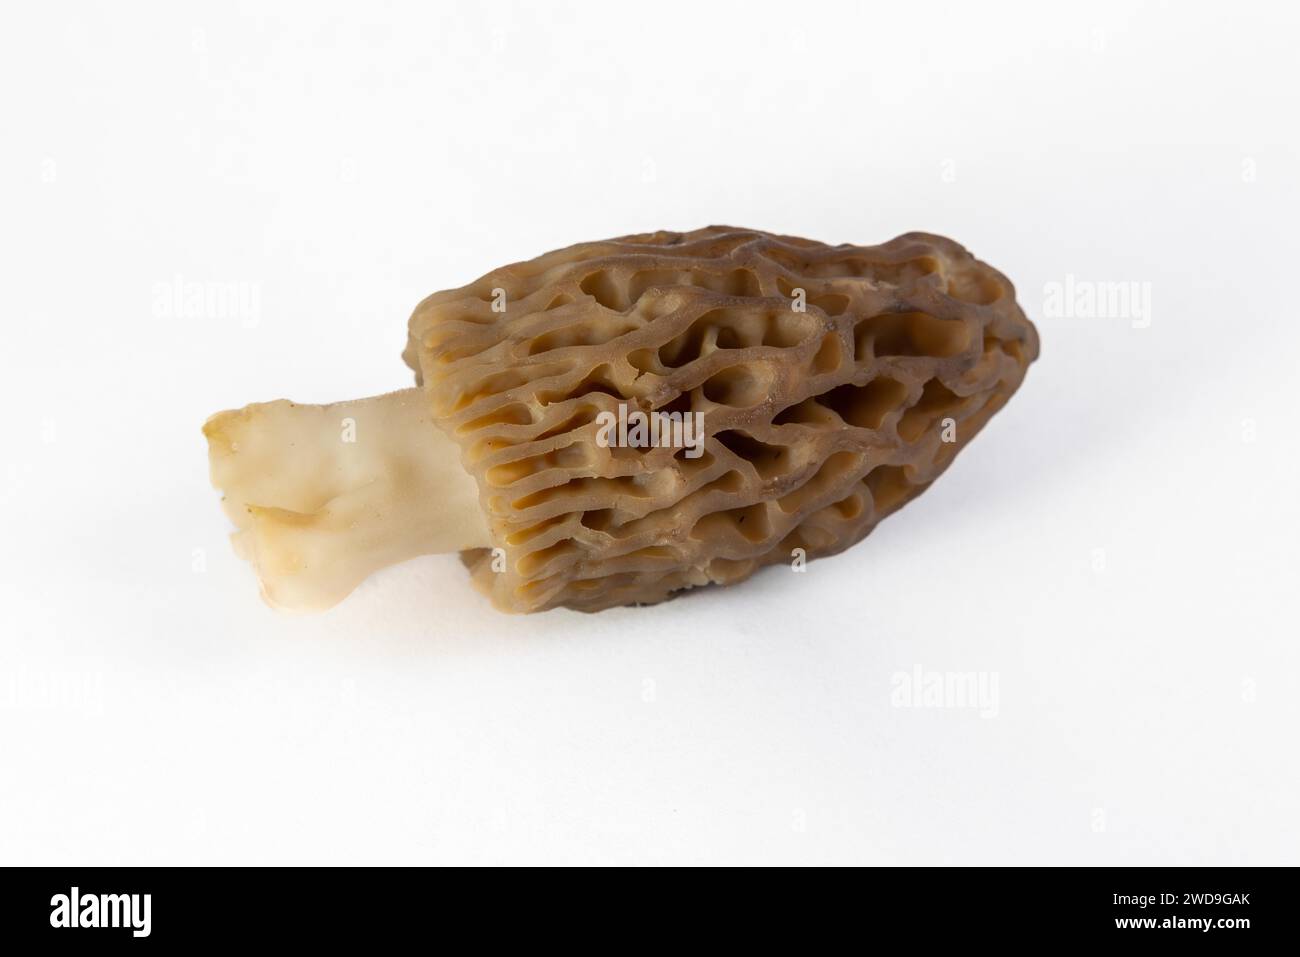 Freshly picked morel mushroom cleaned and placed on a white background Stock Photo